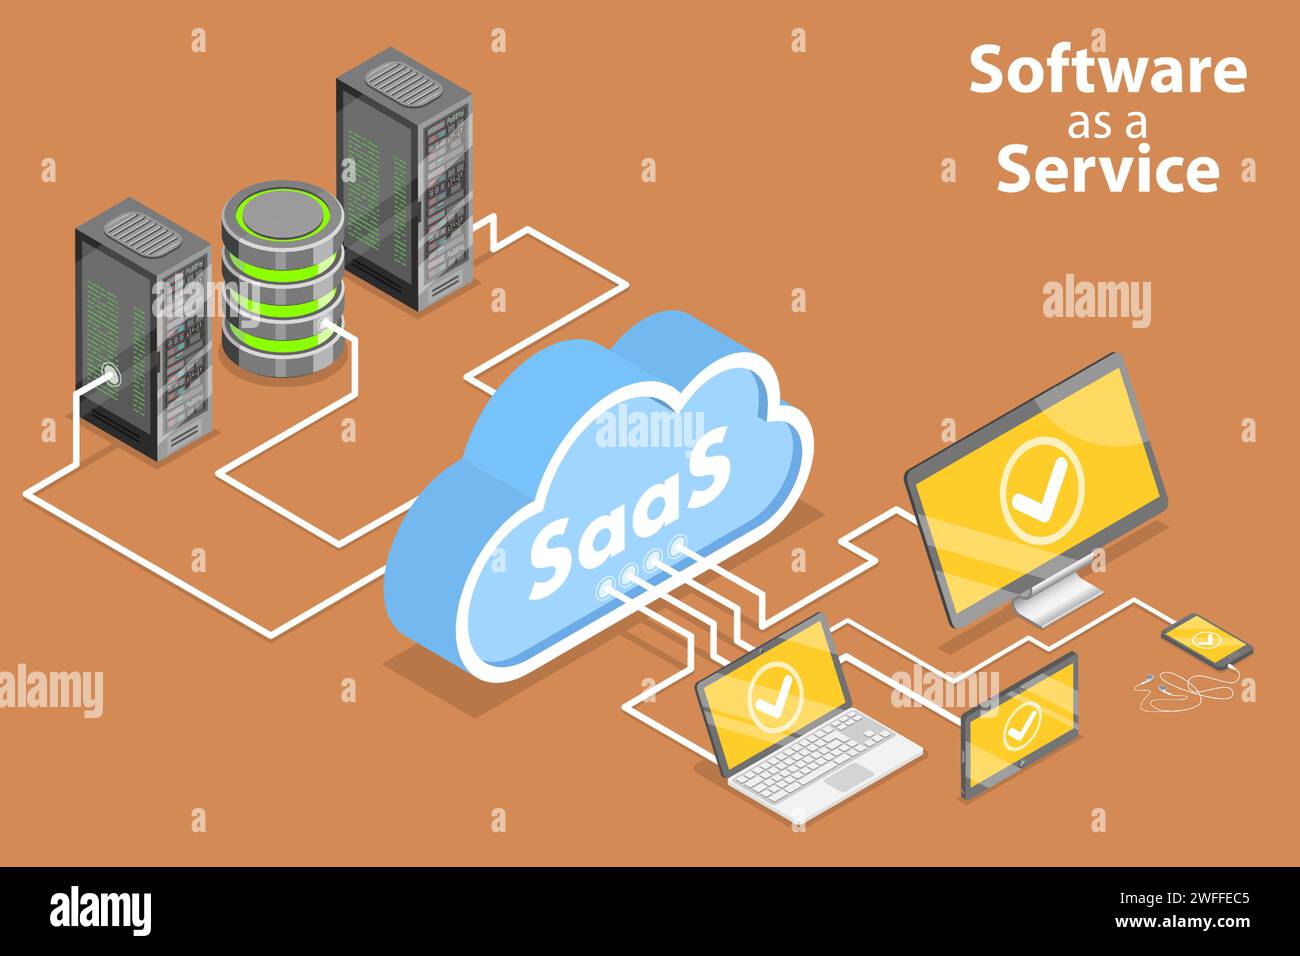 3D Isometric Flat Vector Conceptual Illustration of Saas - Software as a Service, Cloud Computing Technologies. Stock Vector